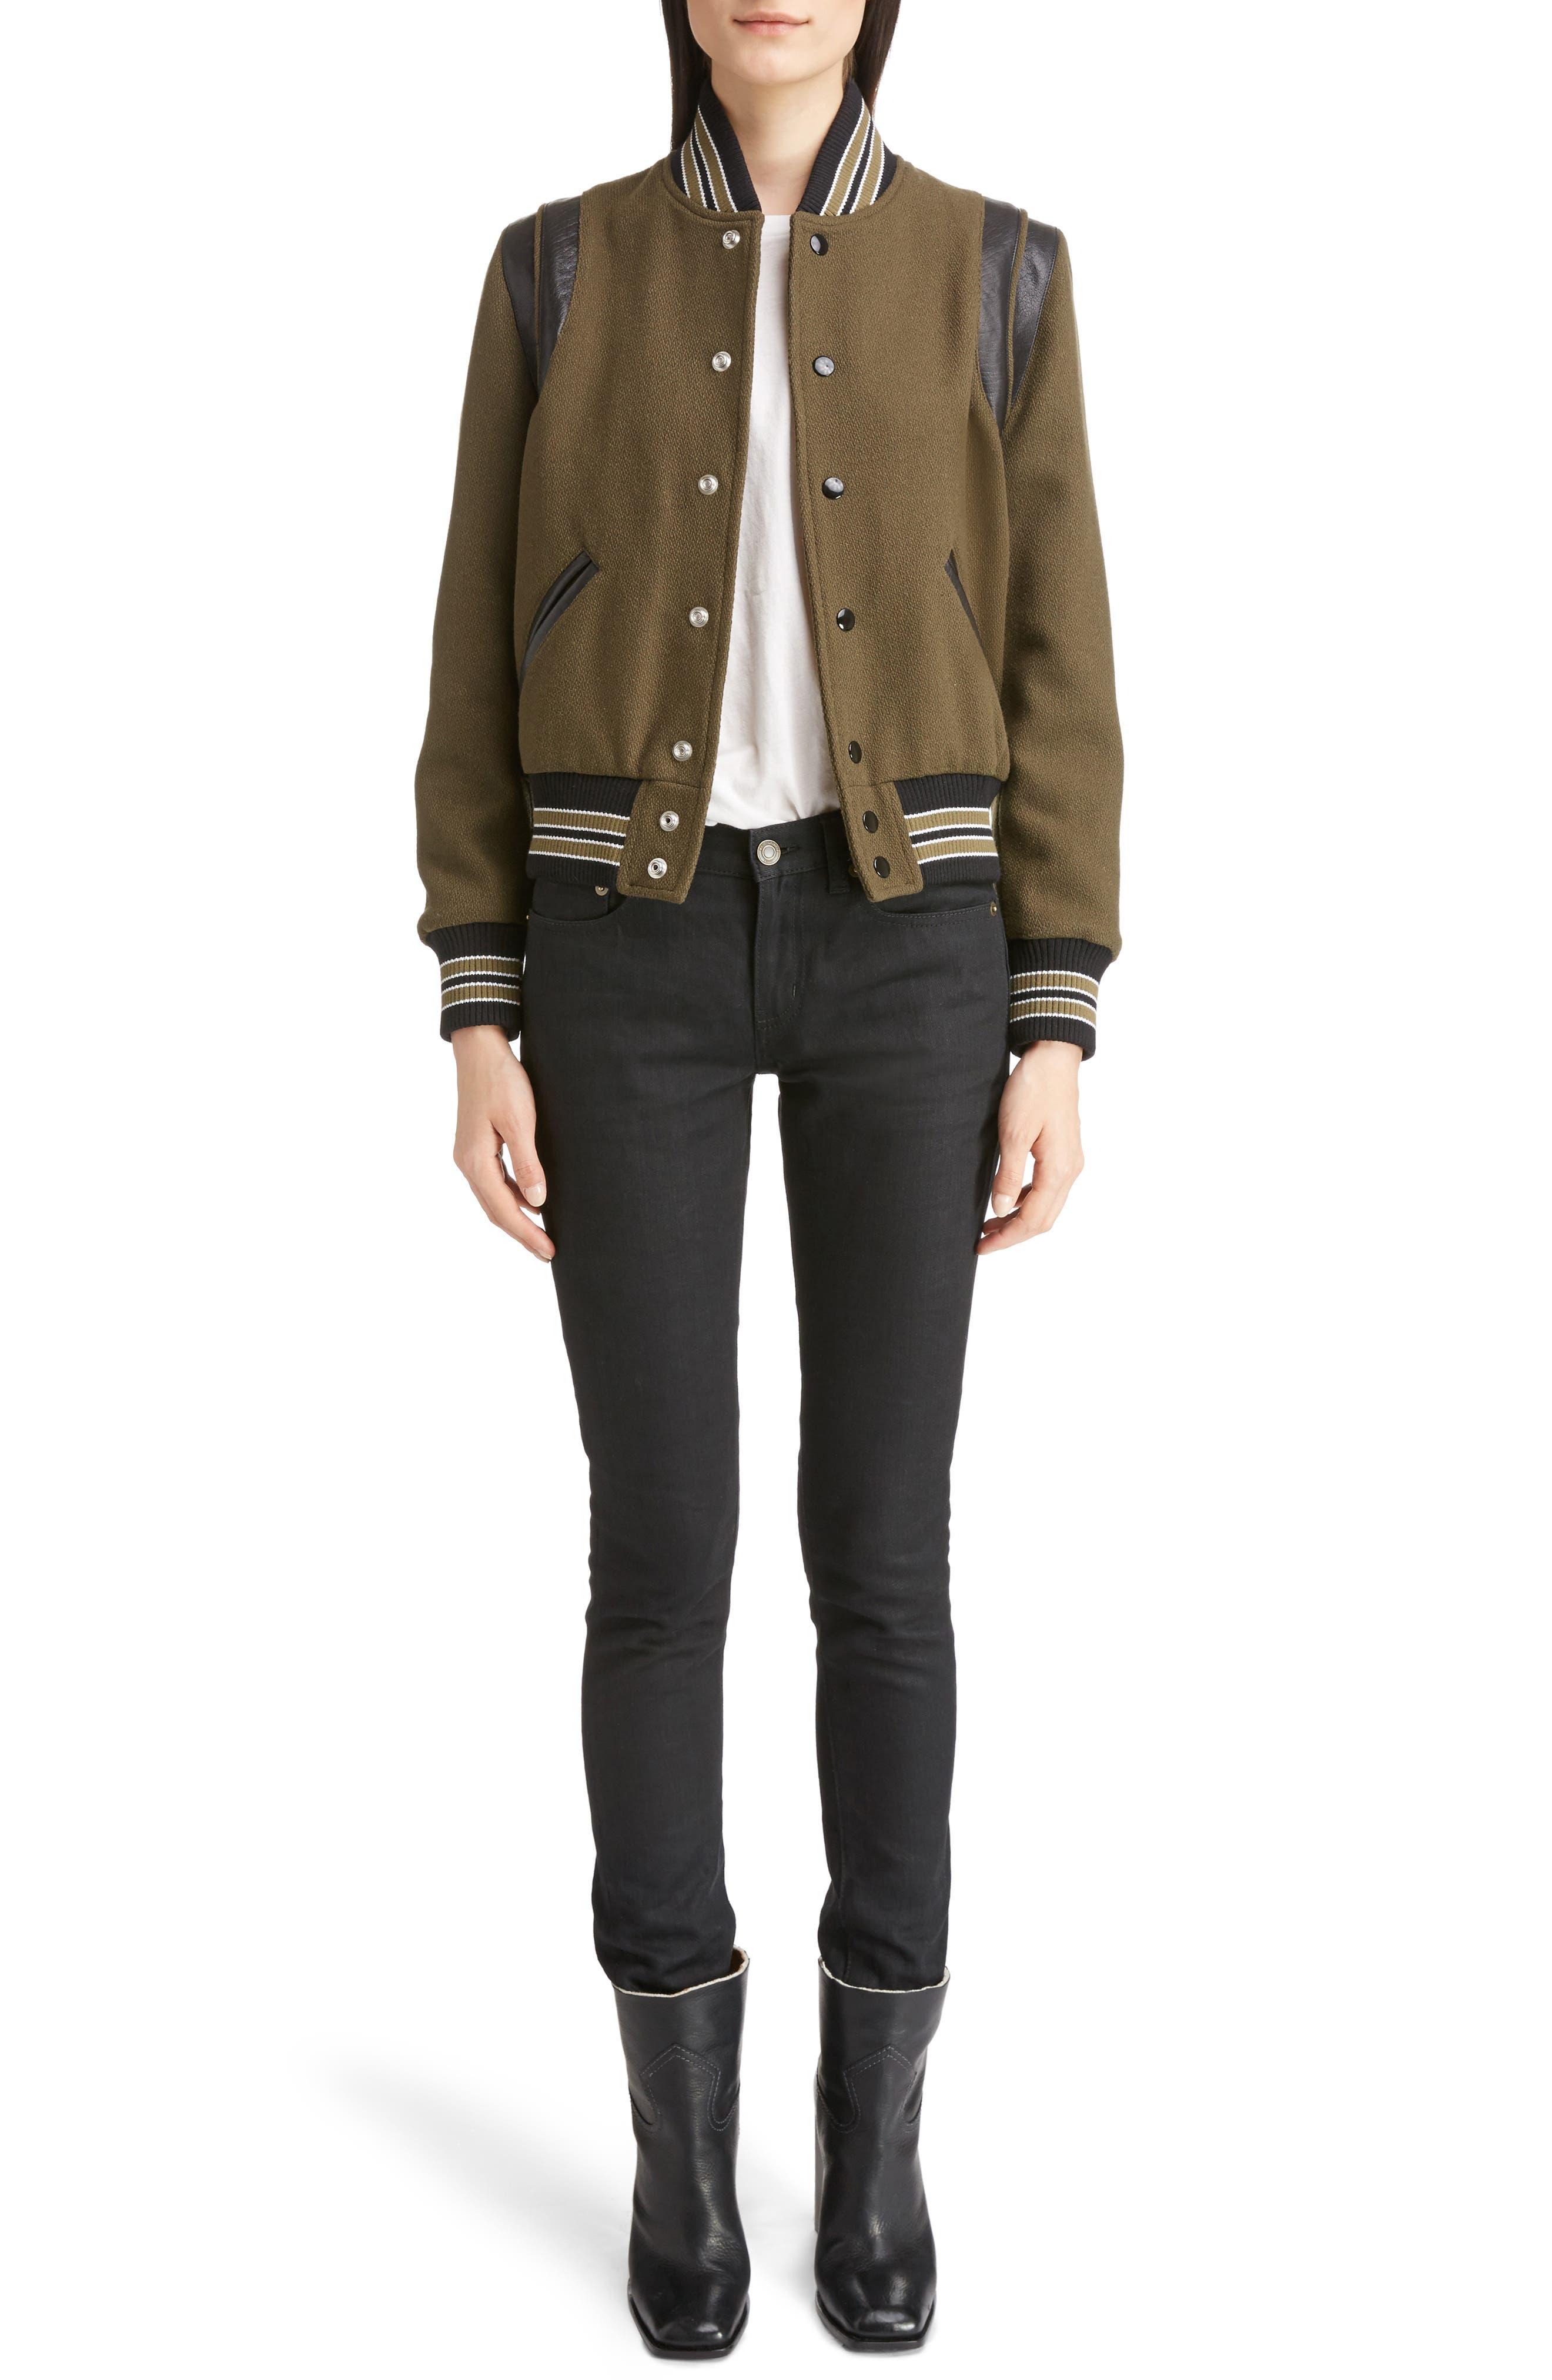 Saint Laurent Leather Trim Classic Teddy Jacket in Brown